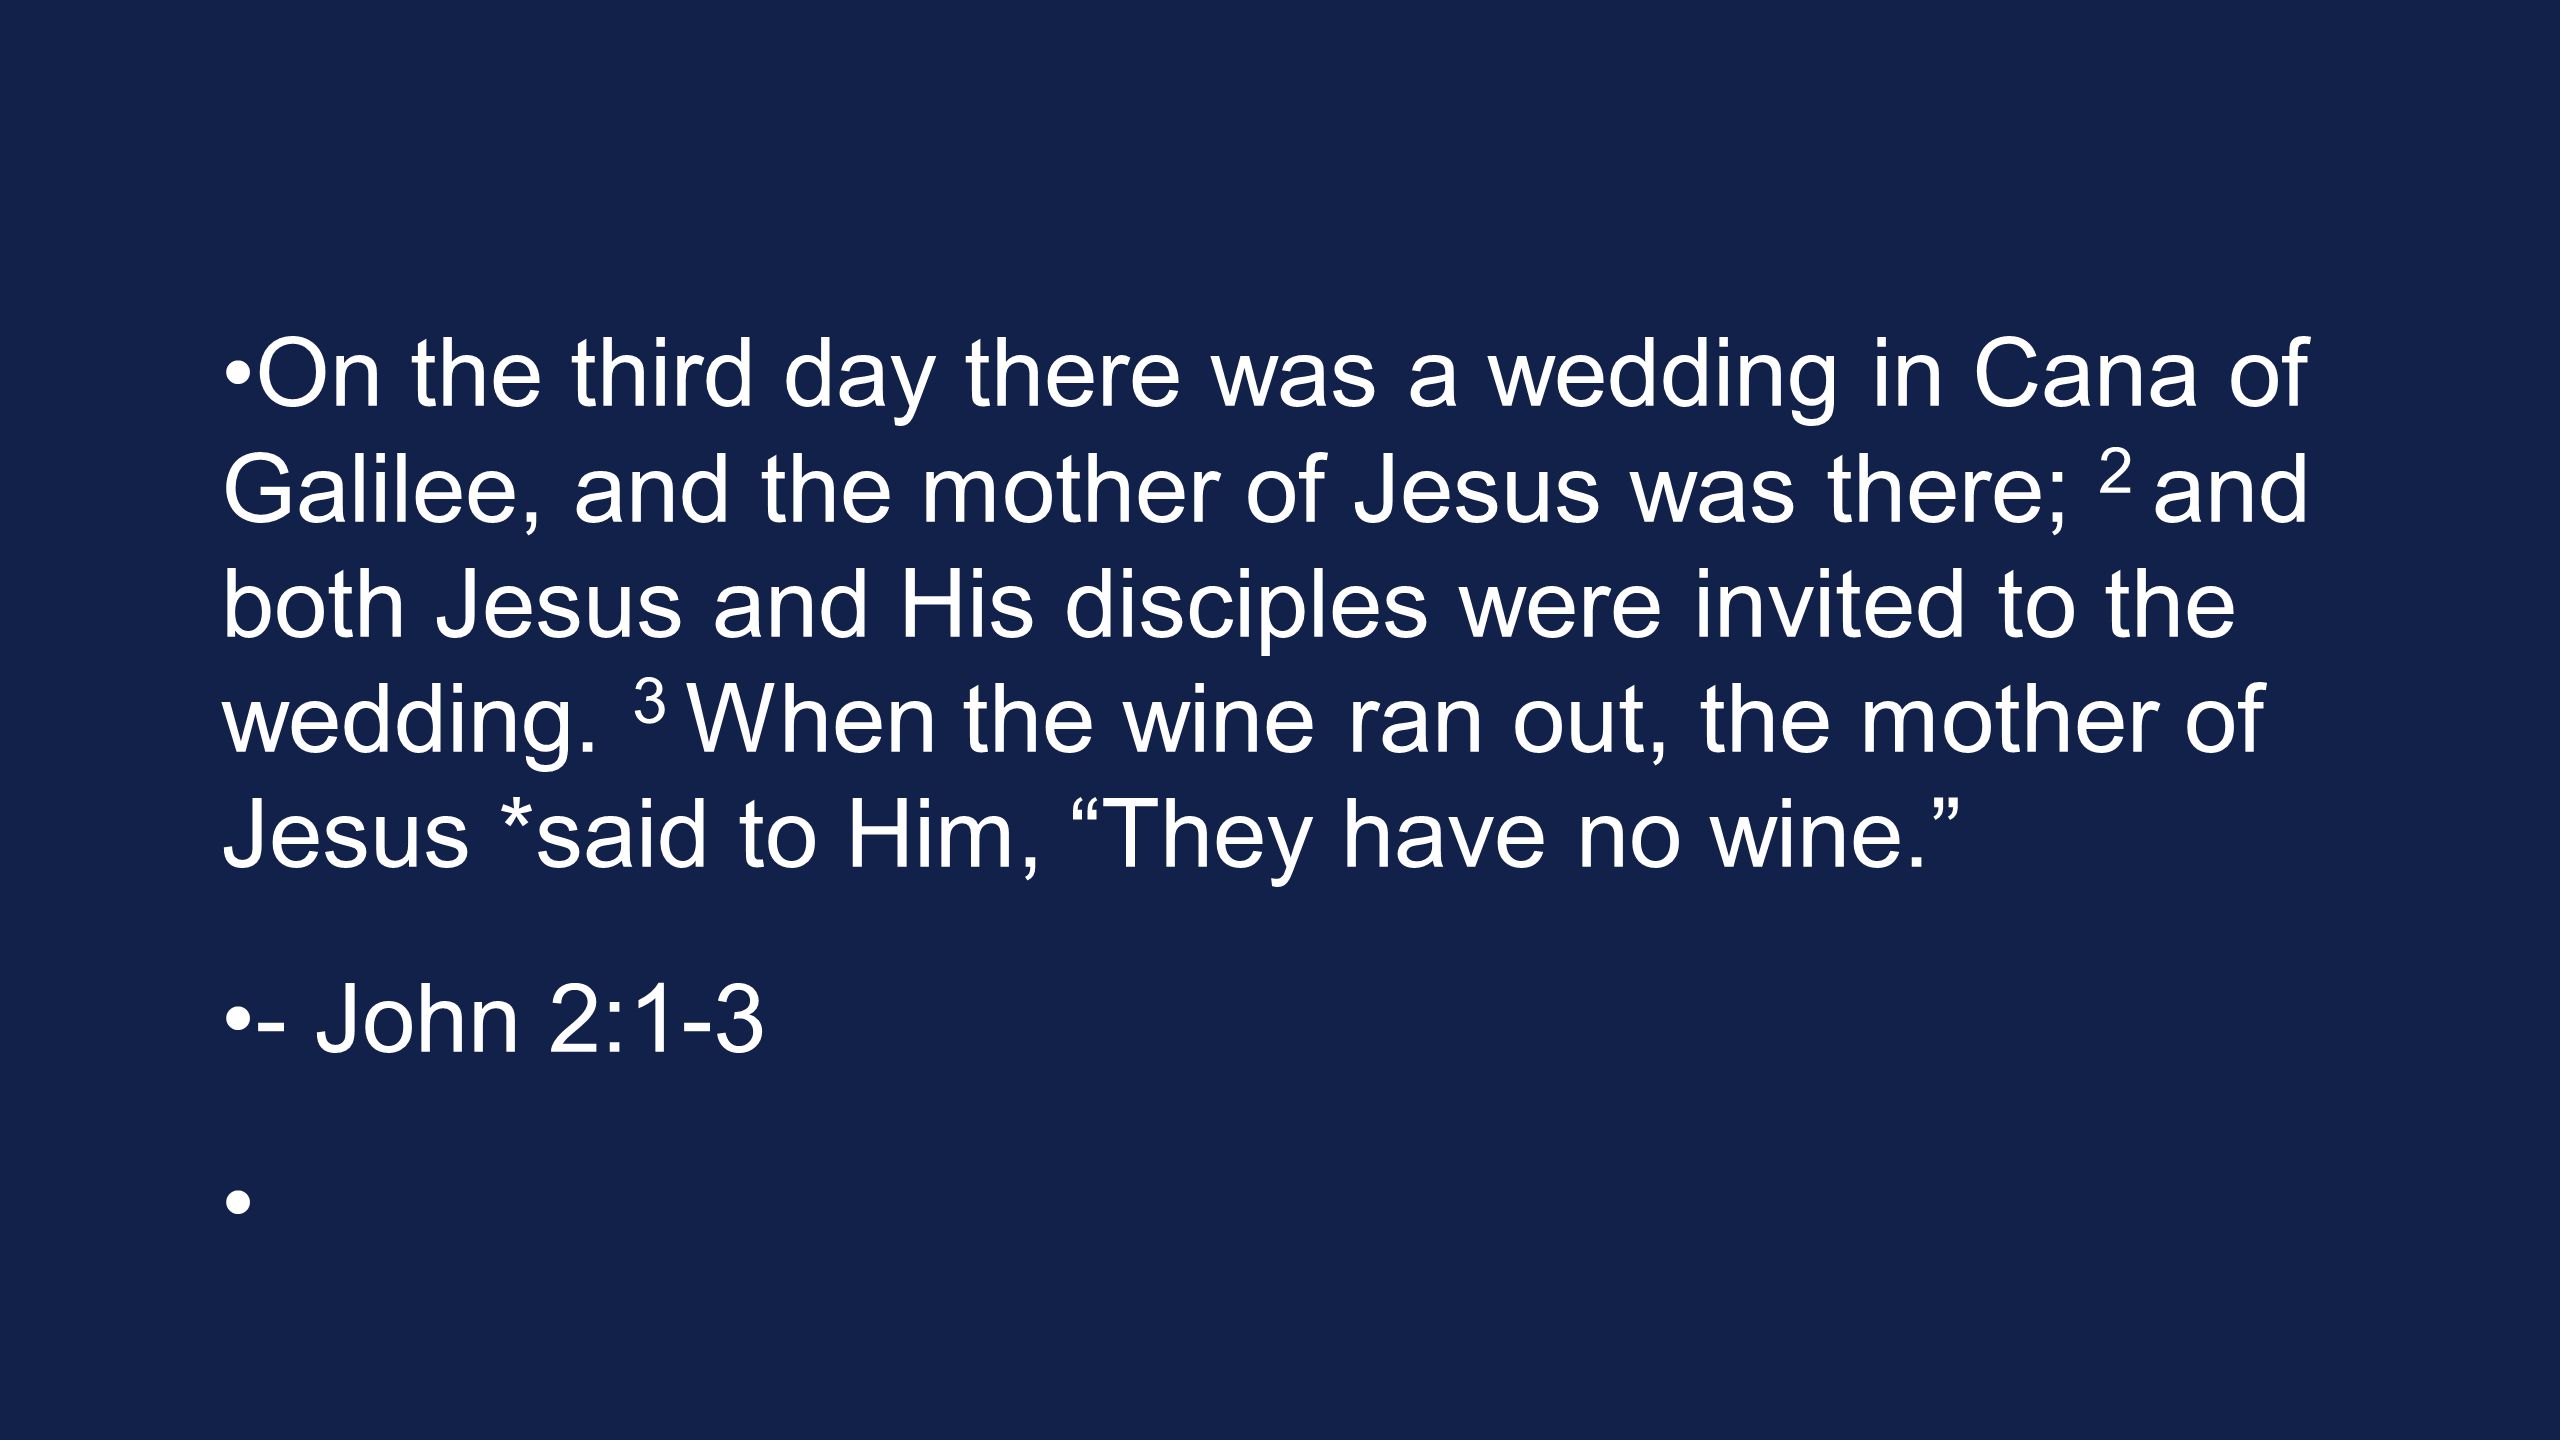 On the third day there was a wedding in Cana of Galilee, and the mother of Jesus was there; 2 and both Jesus and His disciples were invited to the wedding.